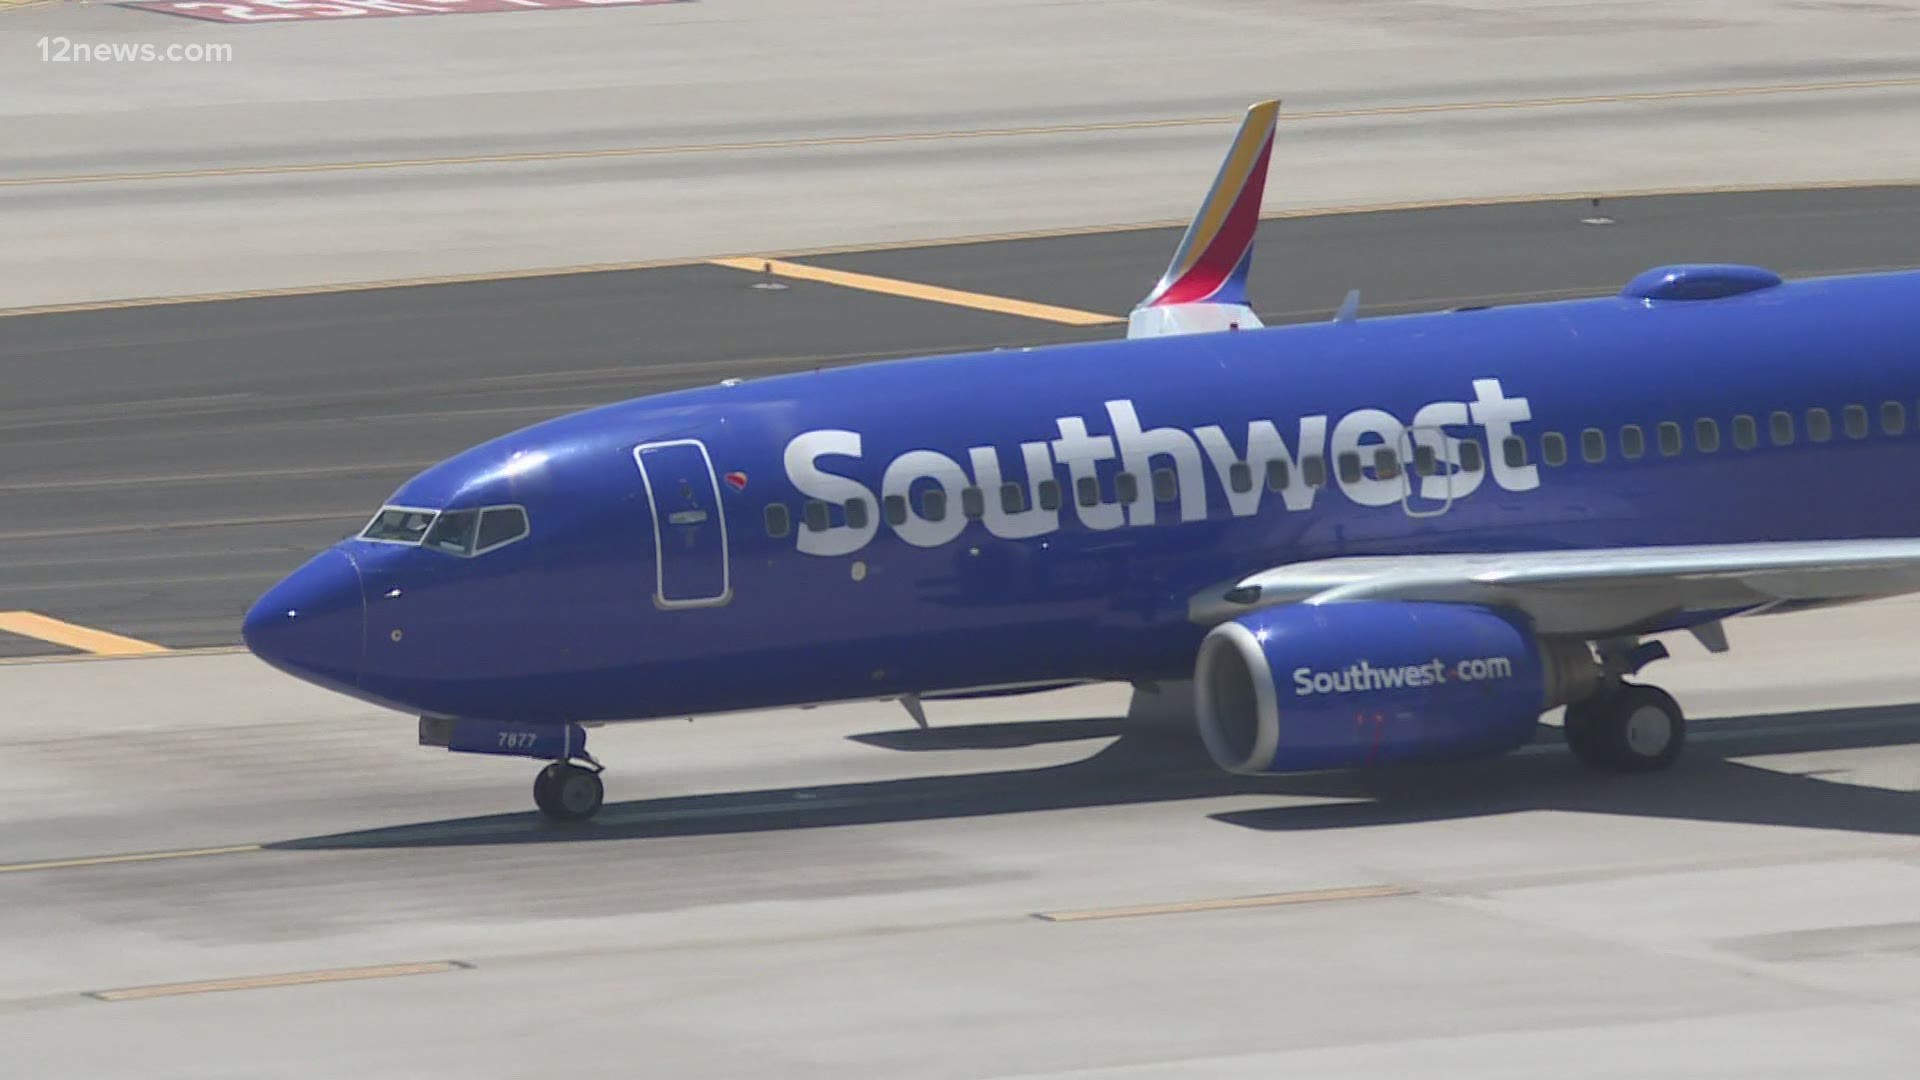 People are traveling again and this summer Southwest Airlines will have more options for flying out of Sky Harbor. They are adding flights beginning June 27th.